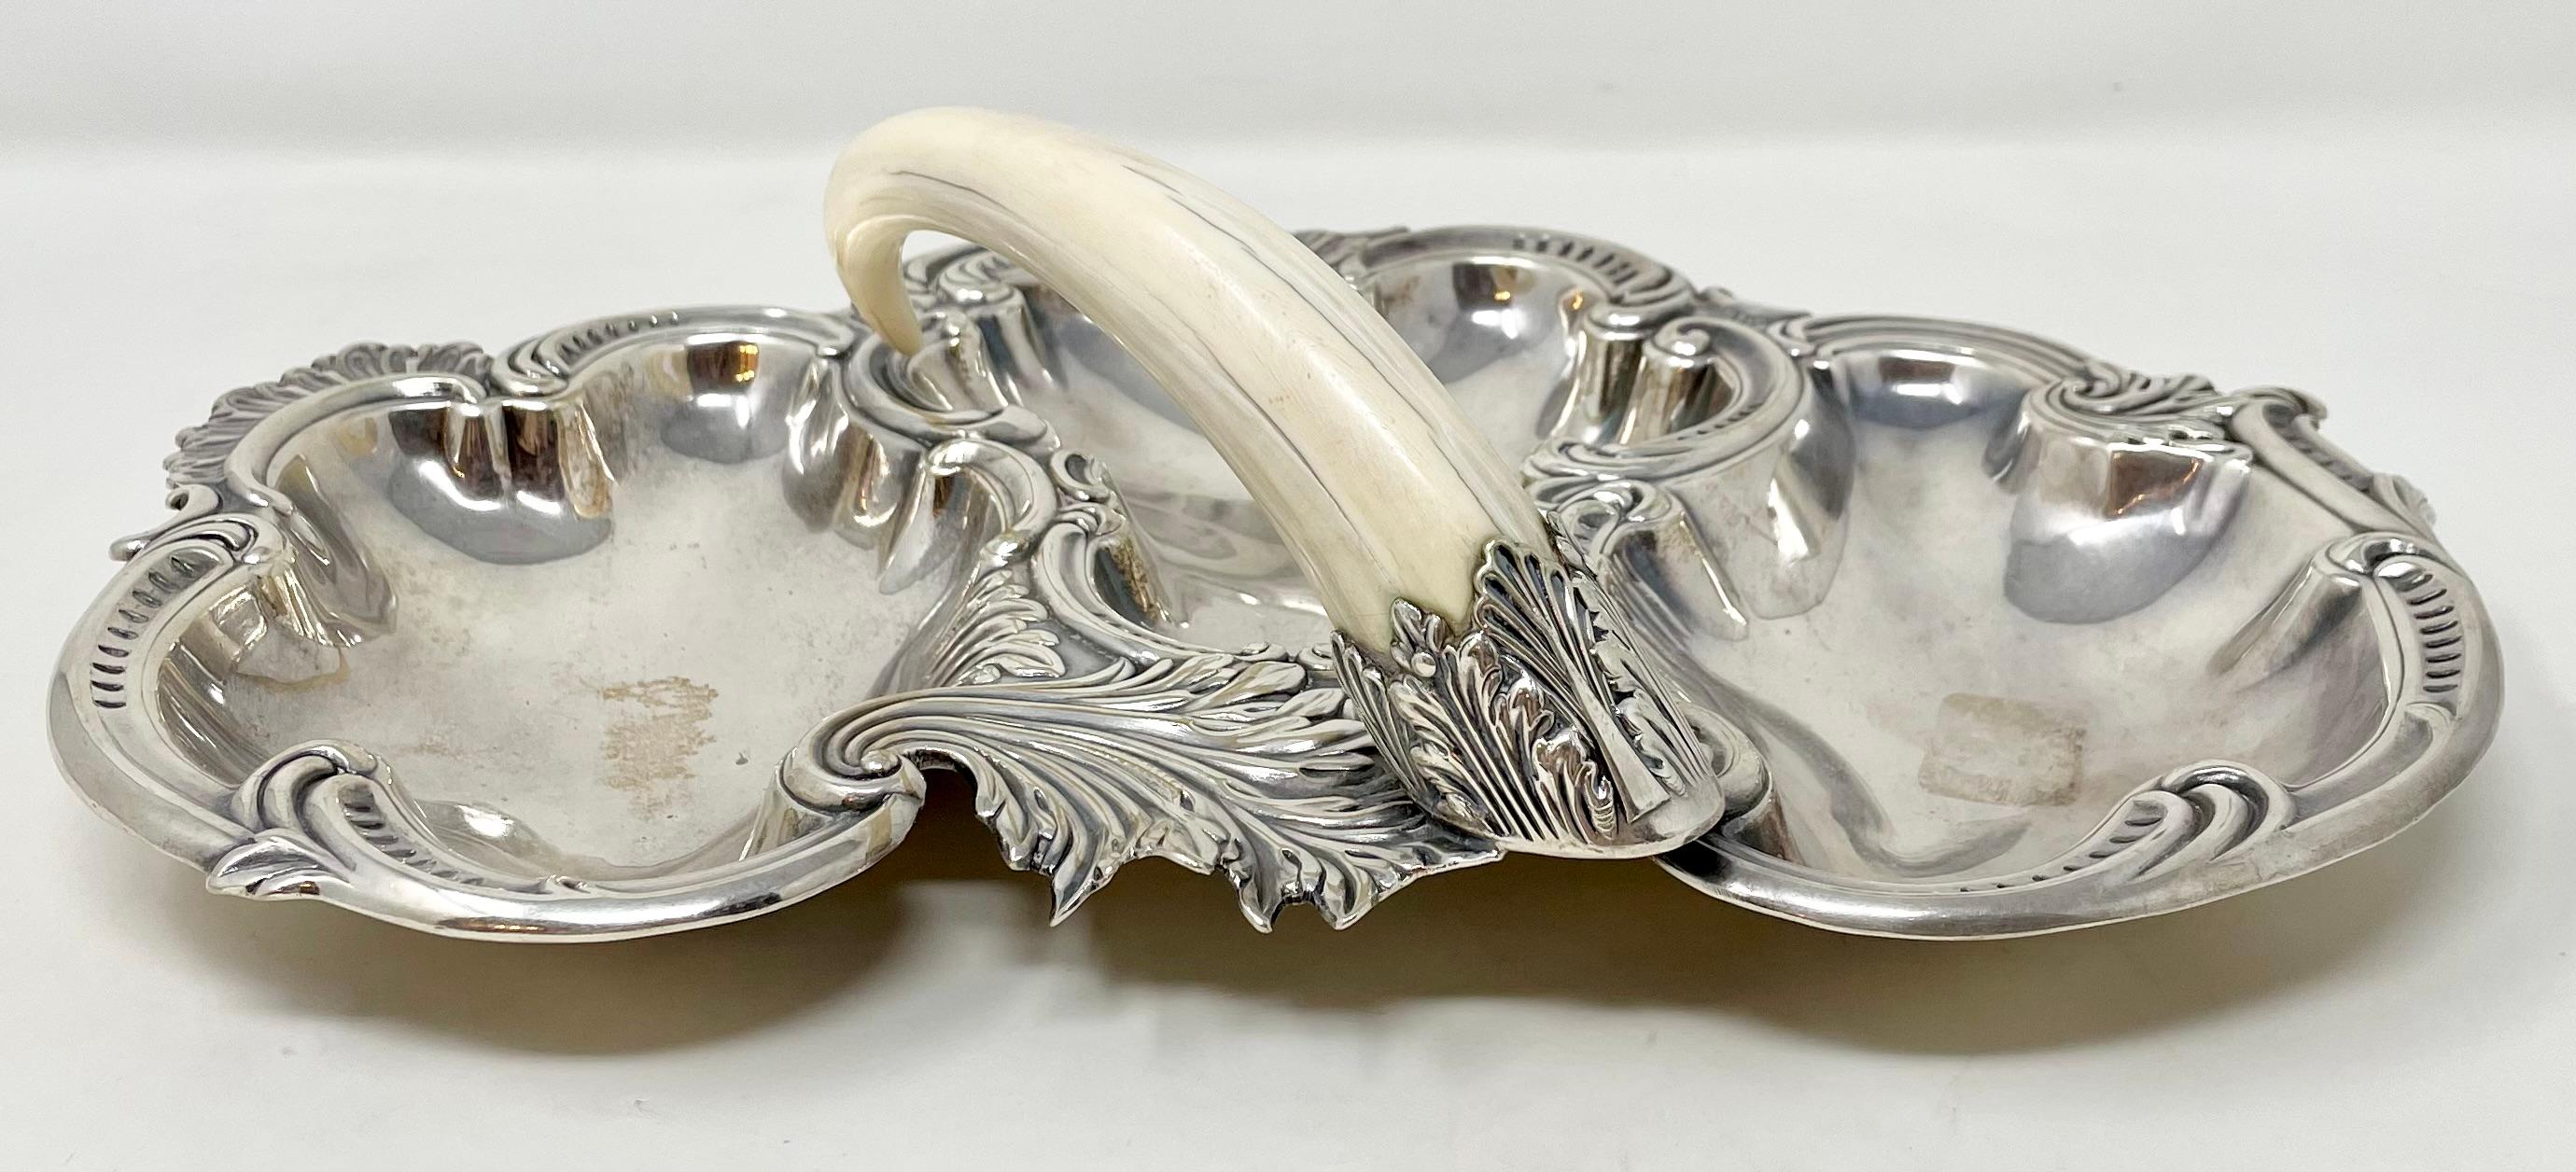 19th Century Antique English Sheffield Silver-Plate and Boar's Tusk Serving Dish, Circa 1900.